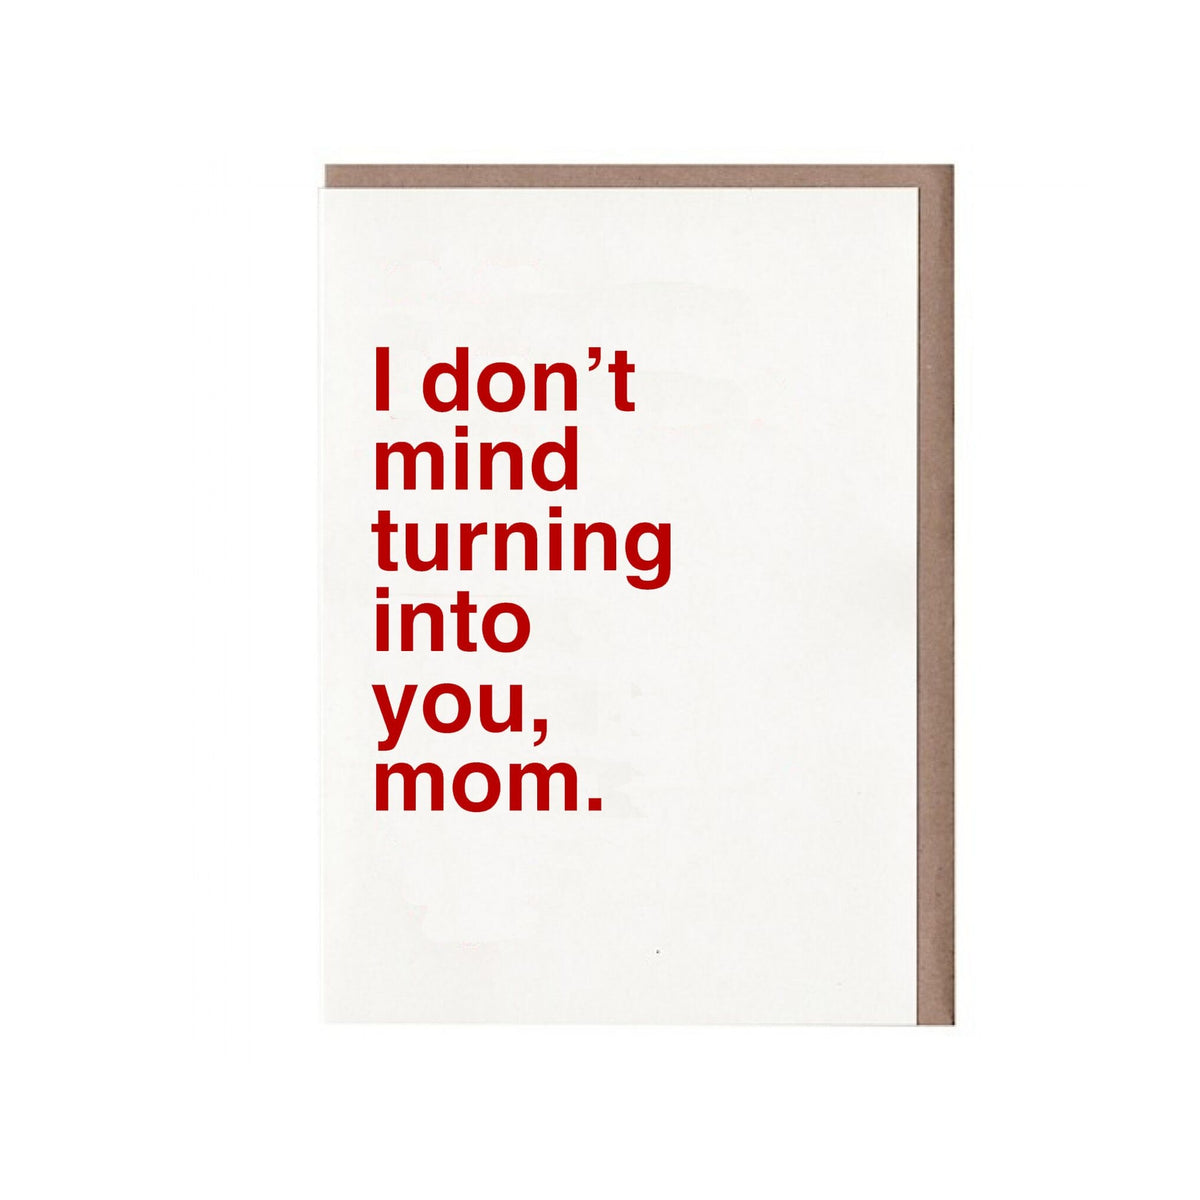 White card with red lettering reading "I don't mind turning into you, mom."